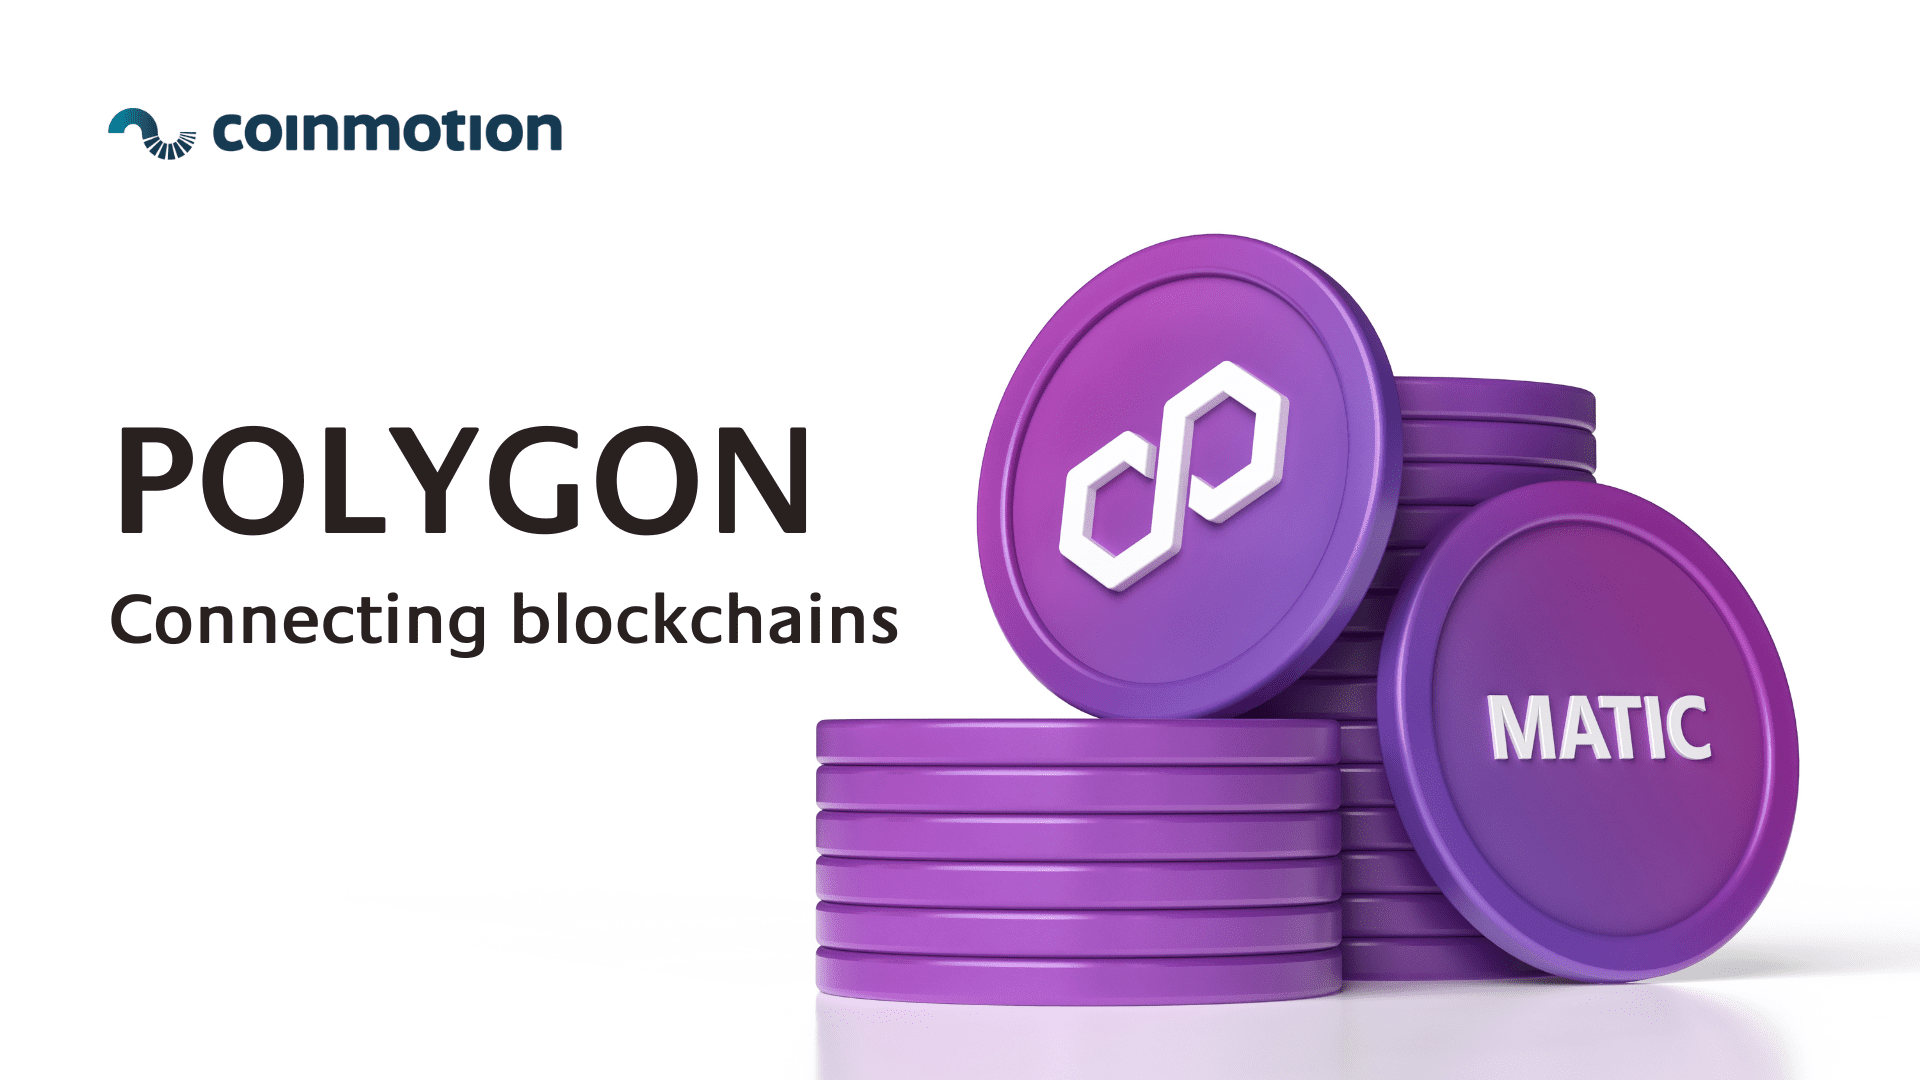 Polygon (MATIC) – Infrastructure for billion users